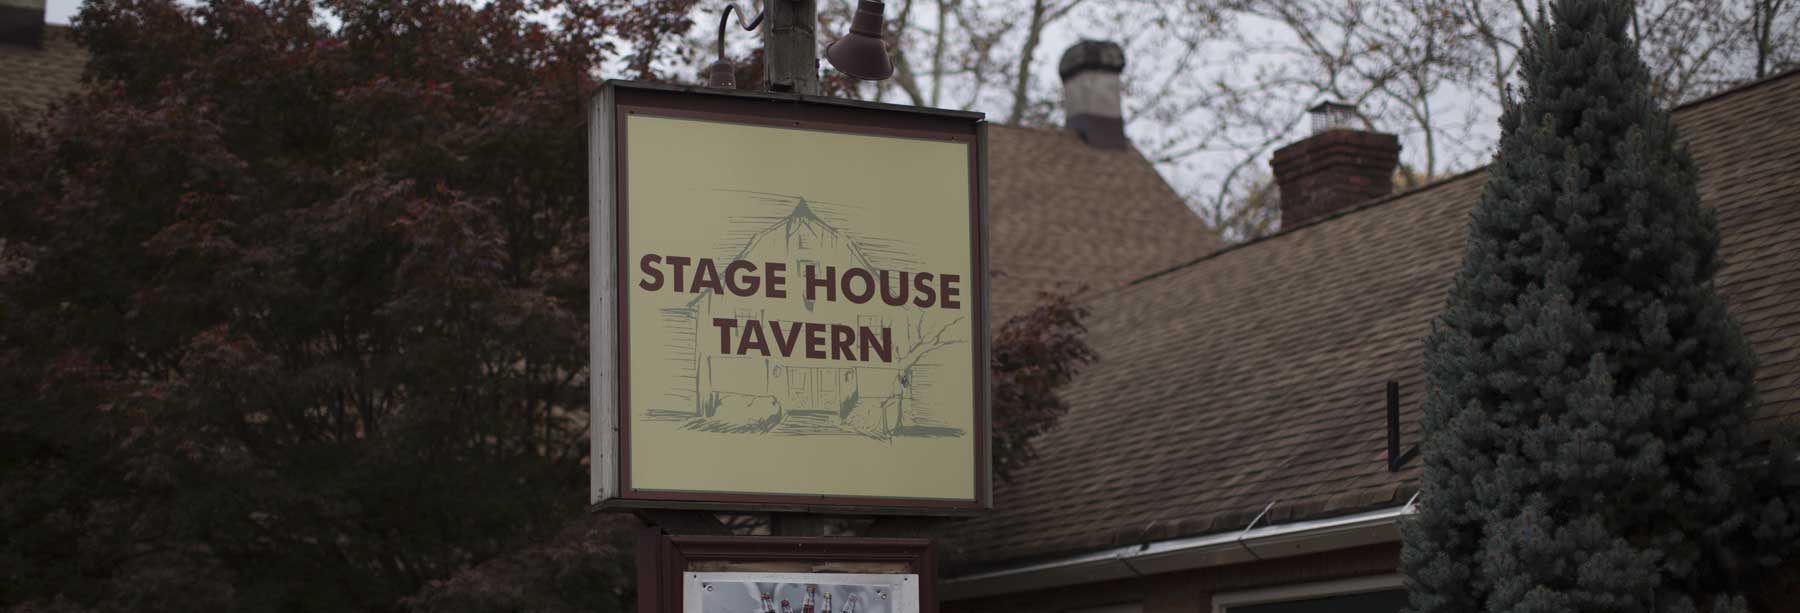  the Stage House Tavern